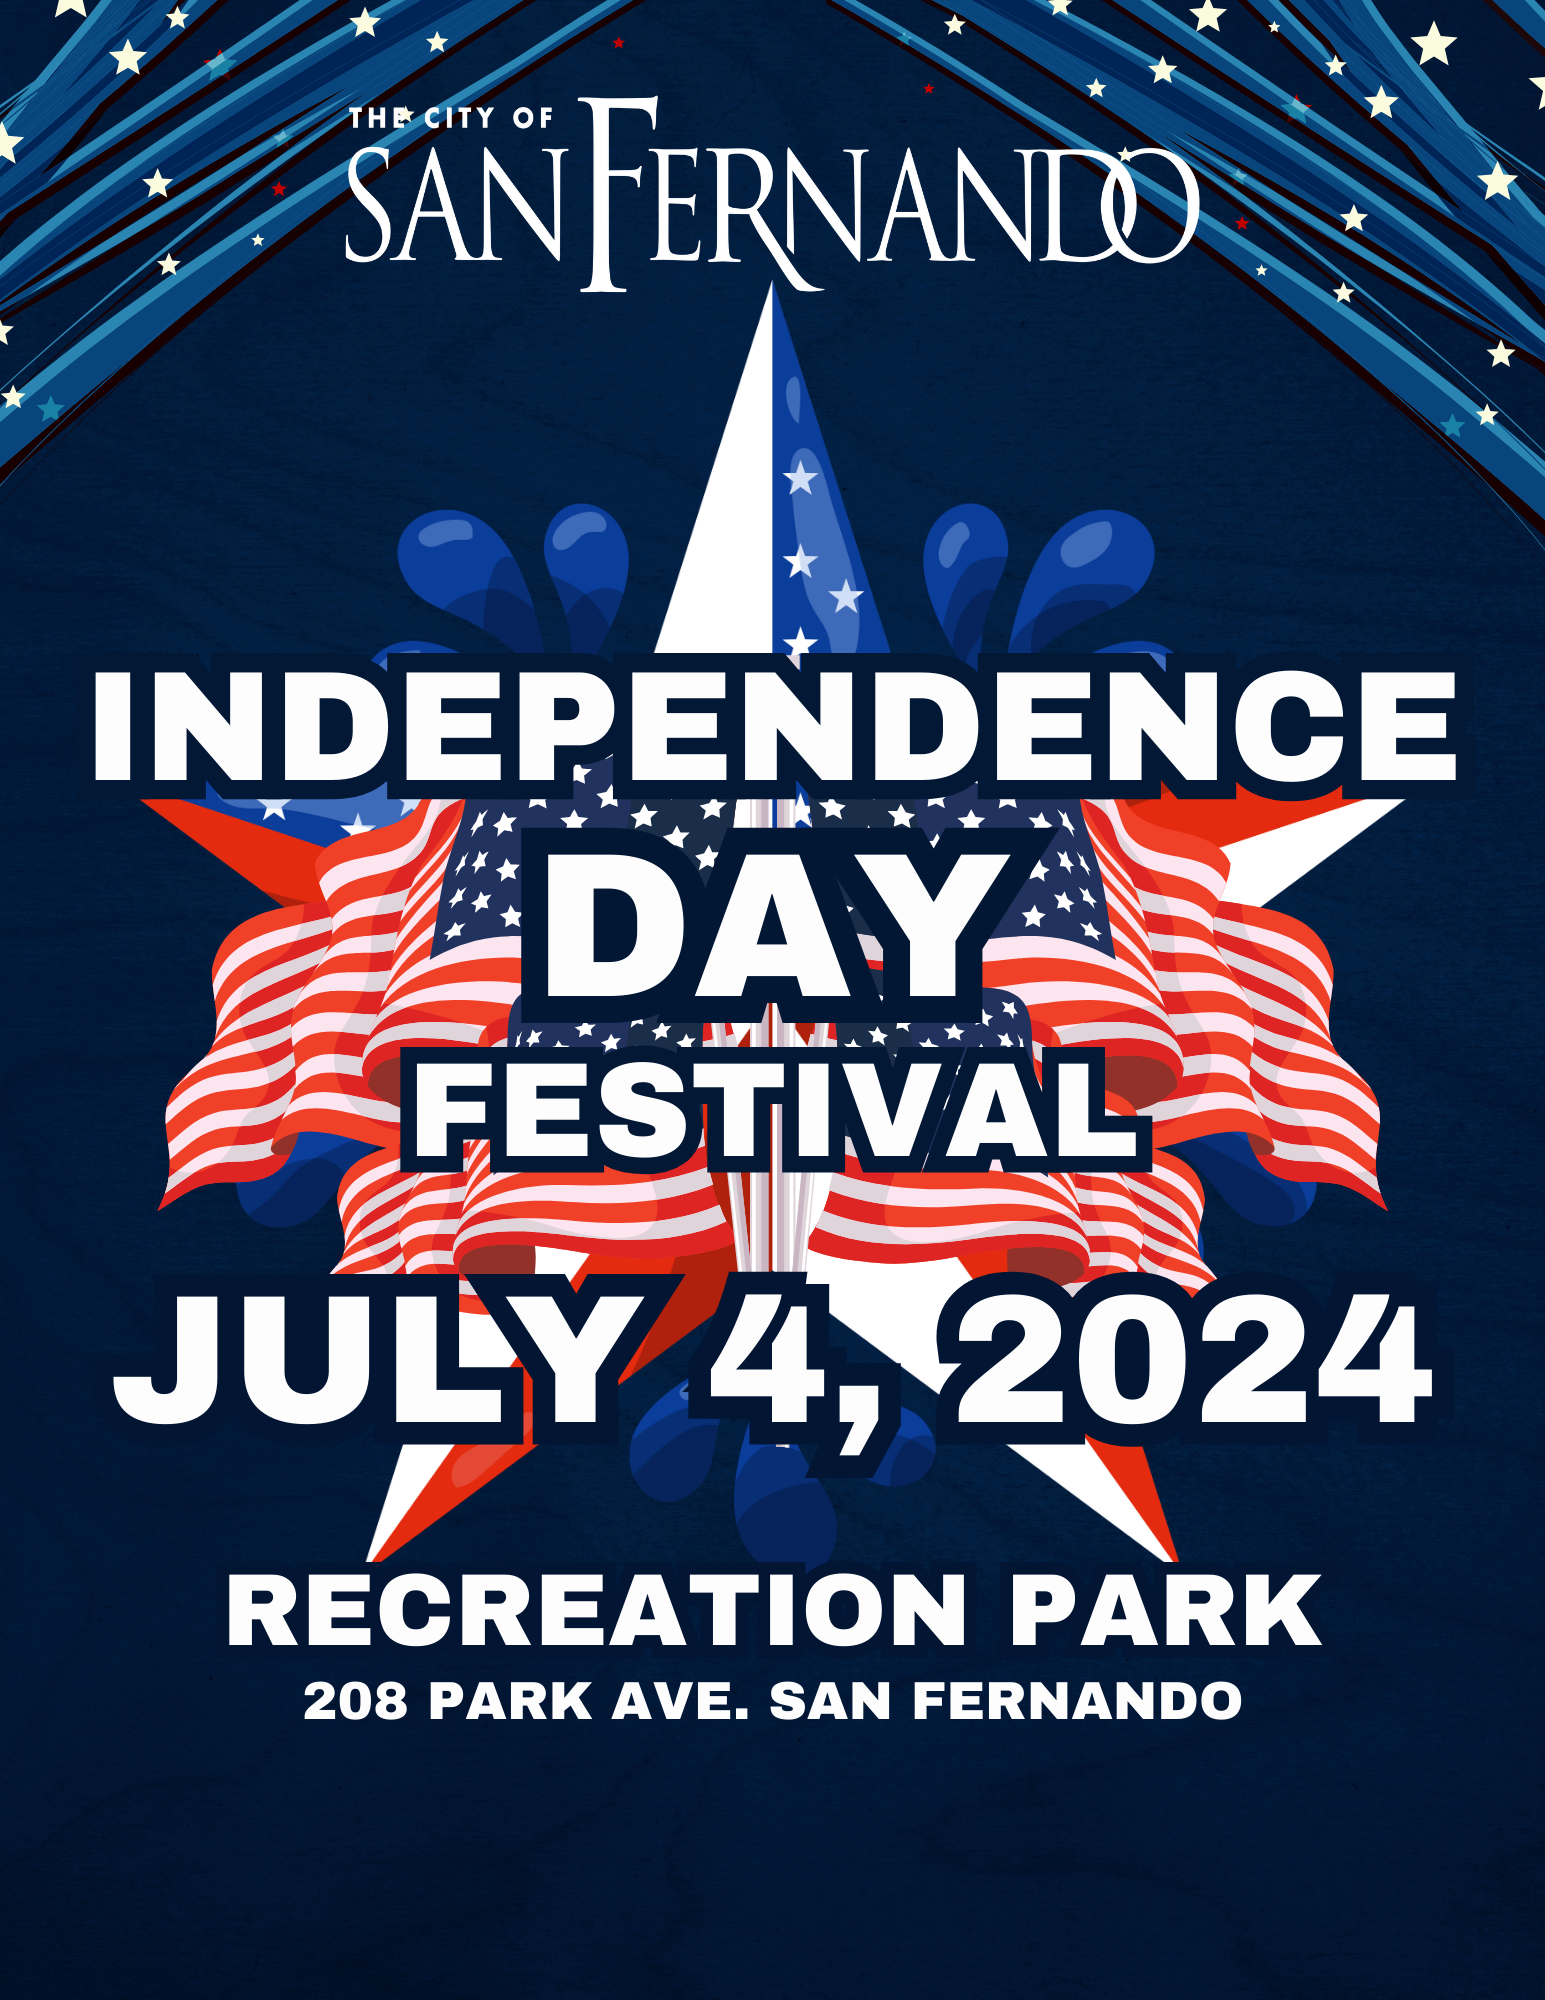 Independence Day Festival